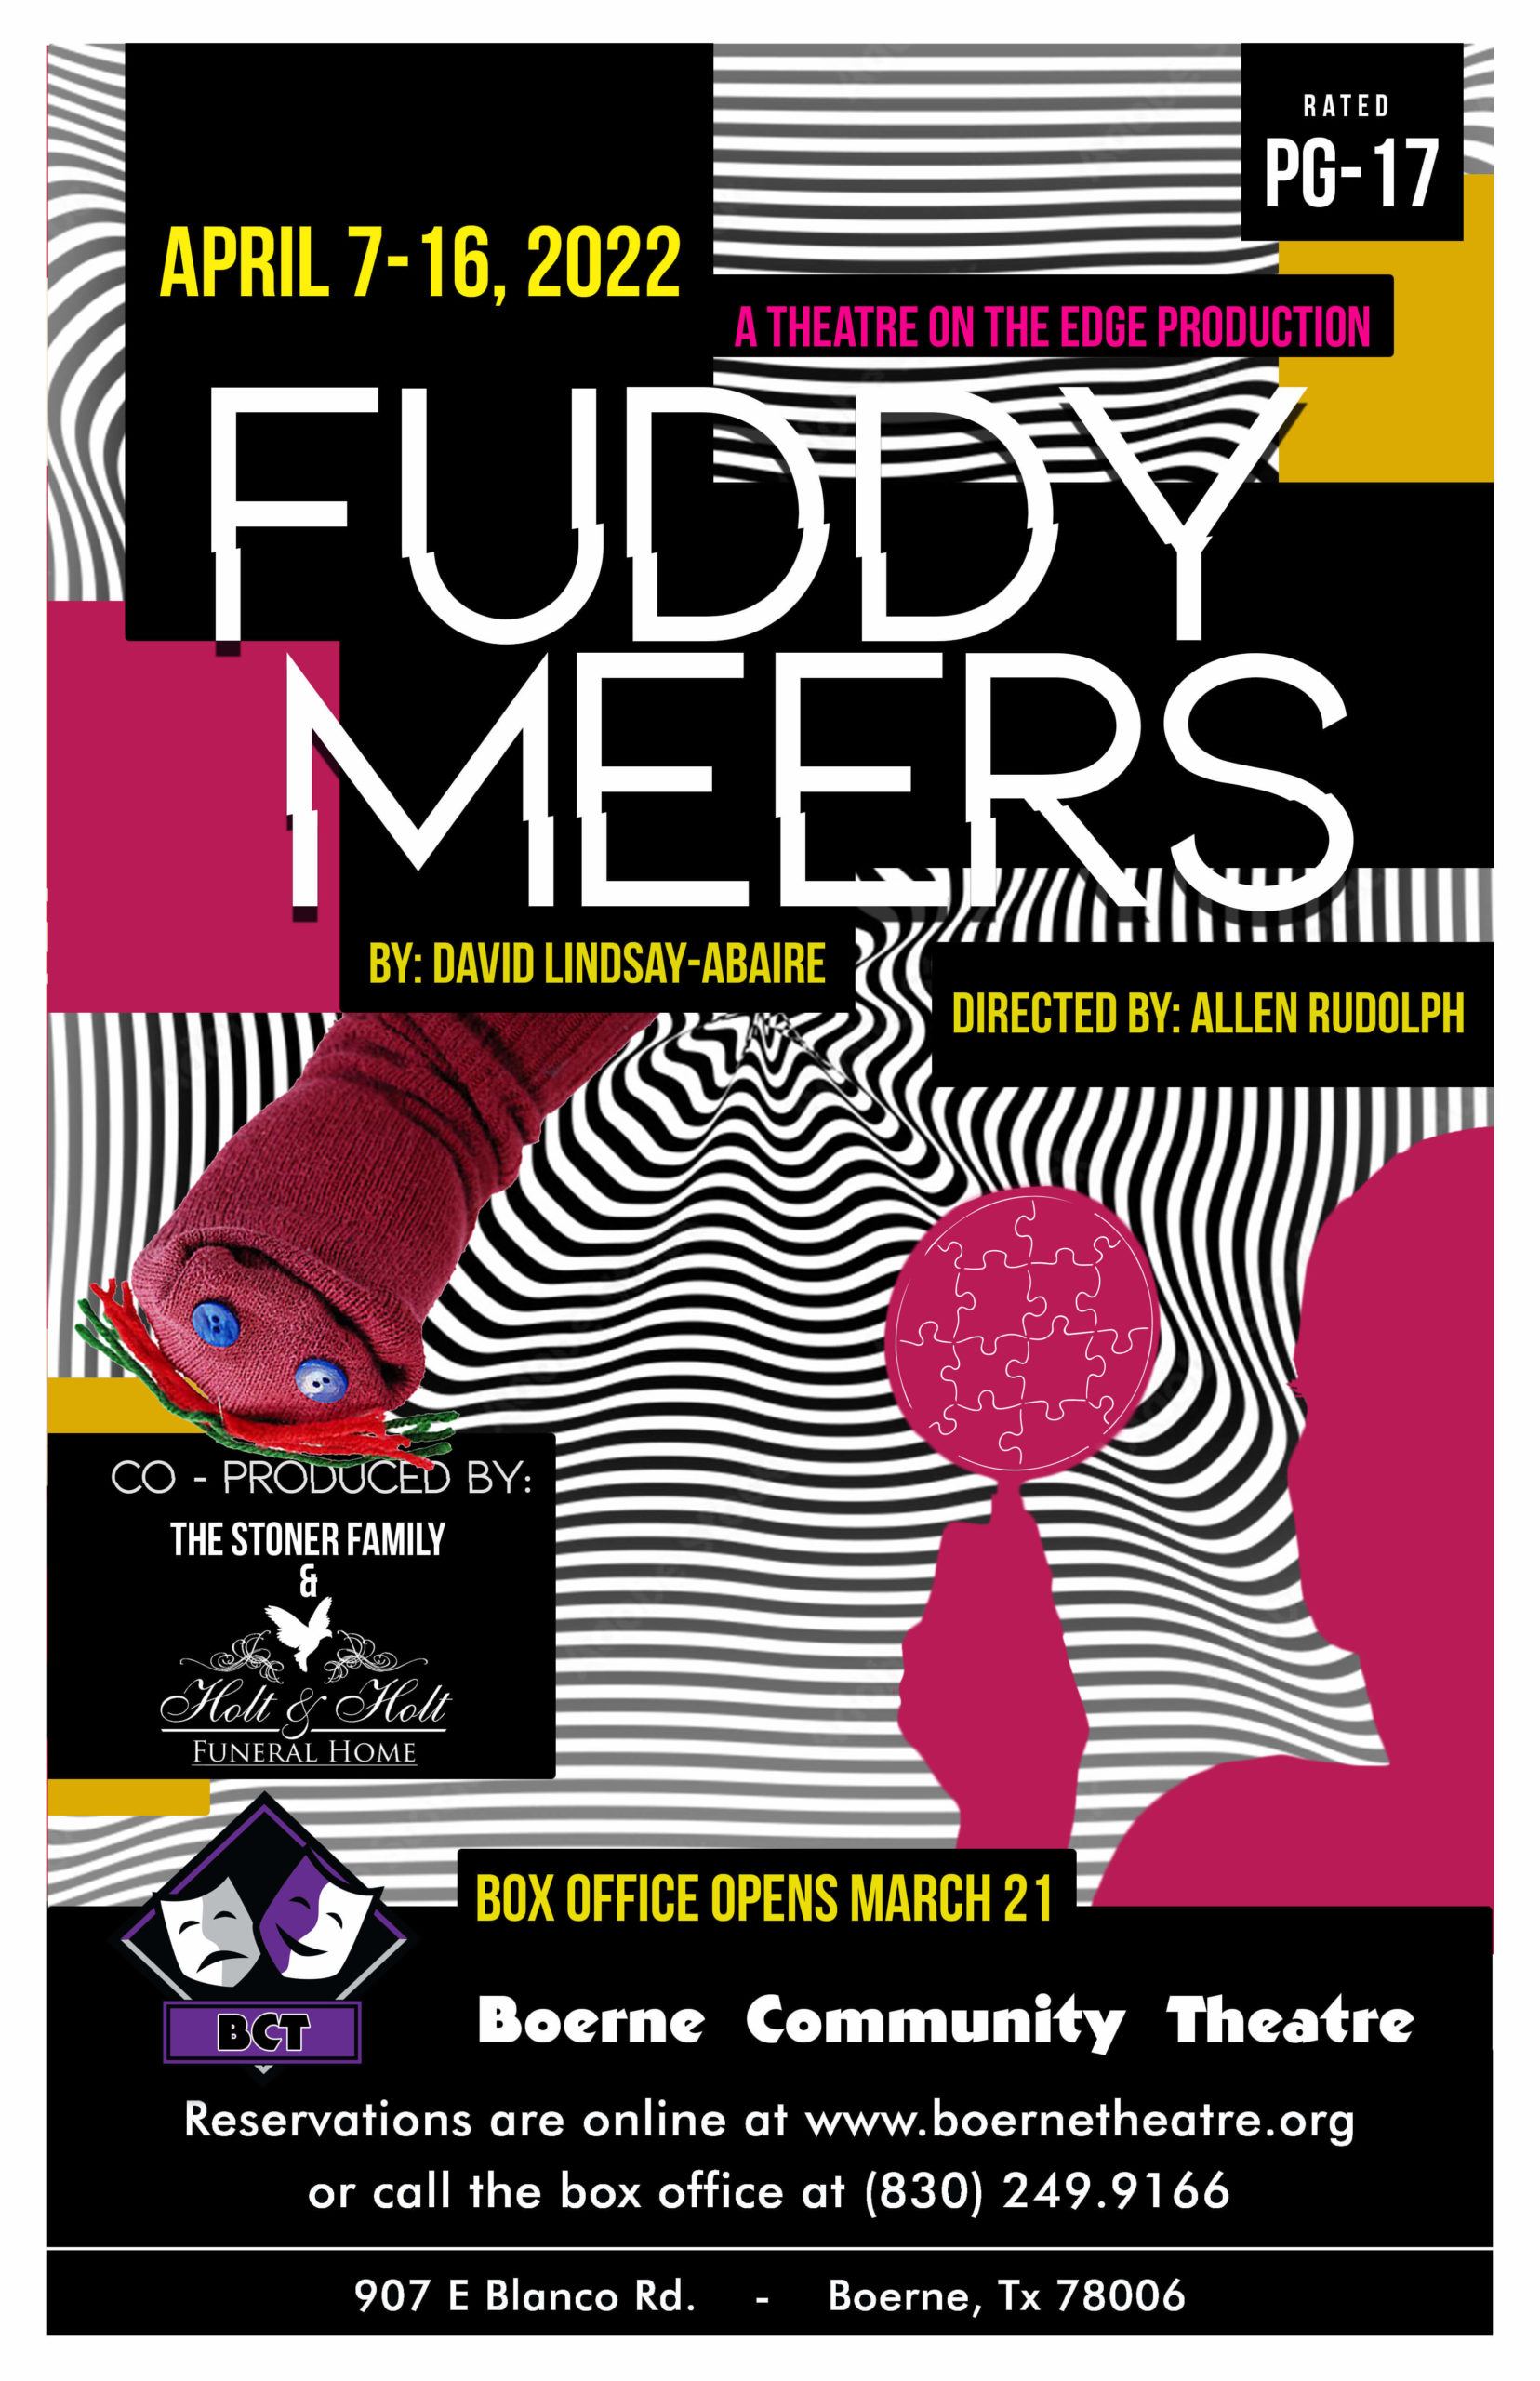 Fuddy Mears by Boerne Community Theatre